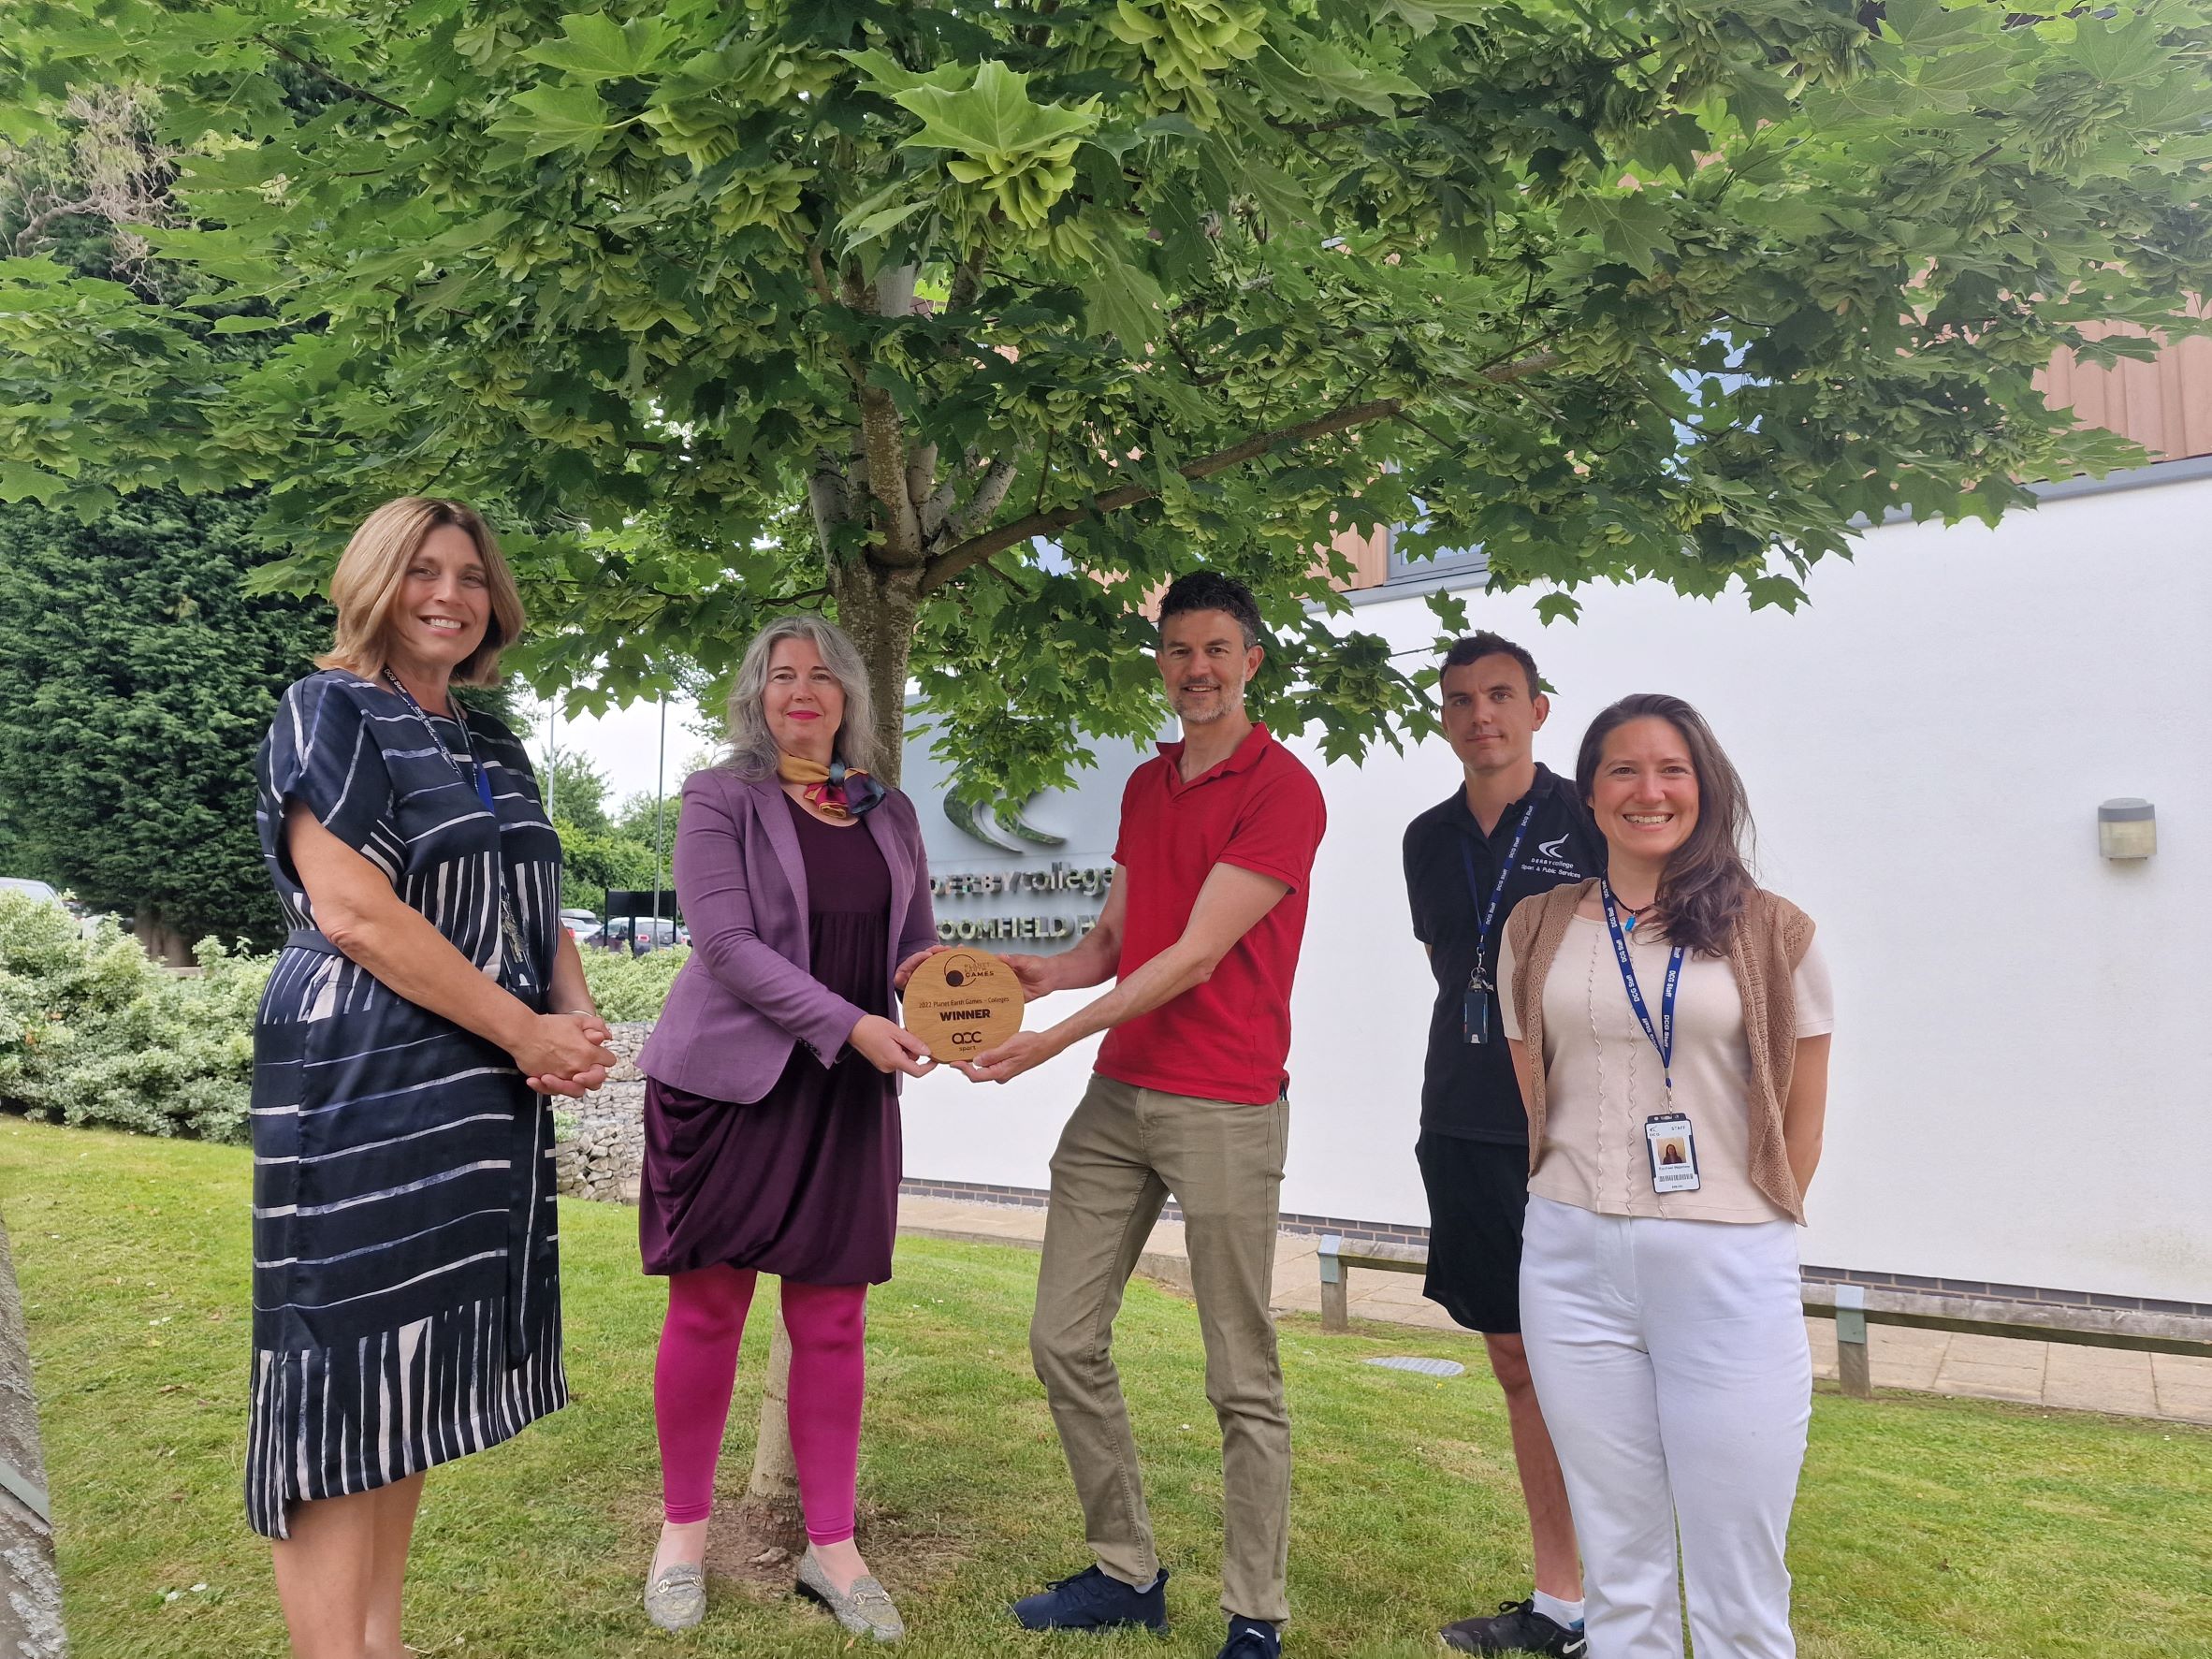 Founder of Planet Earth Games, Chris Broadbent presents the Planet Earth Games trophy to DCG CEO Mandie Stravino alongside DCG deputy CEO Heather Simcox, Sport and Public Services teacher Phil Kilpatrick and DCG environmental and sustainability officer Rachael Willshaw.